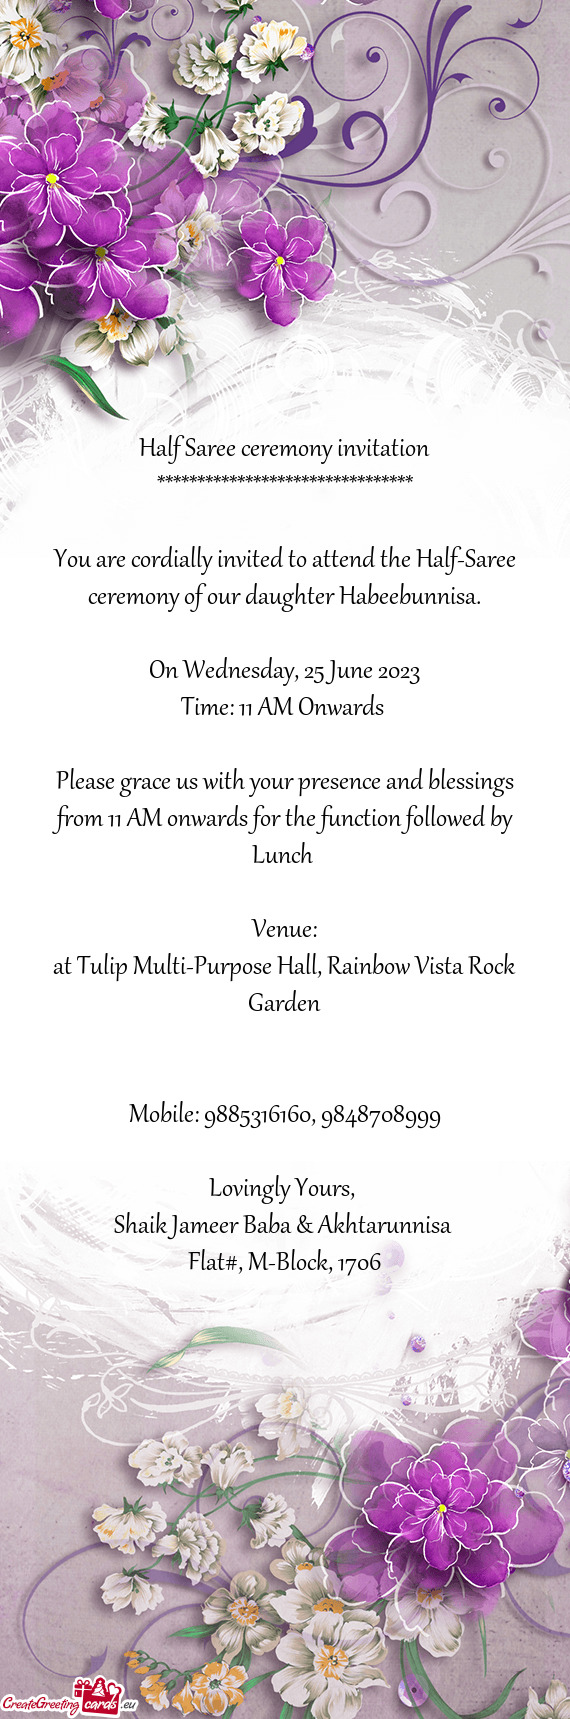 You are cordially invited to attend the Half-Saree ceremony of our daughter Habeebunnisa